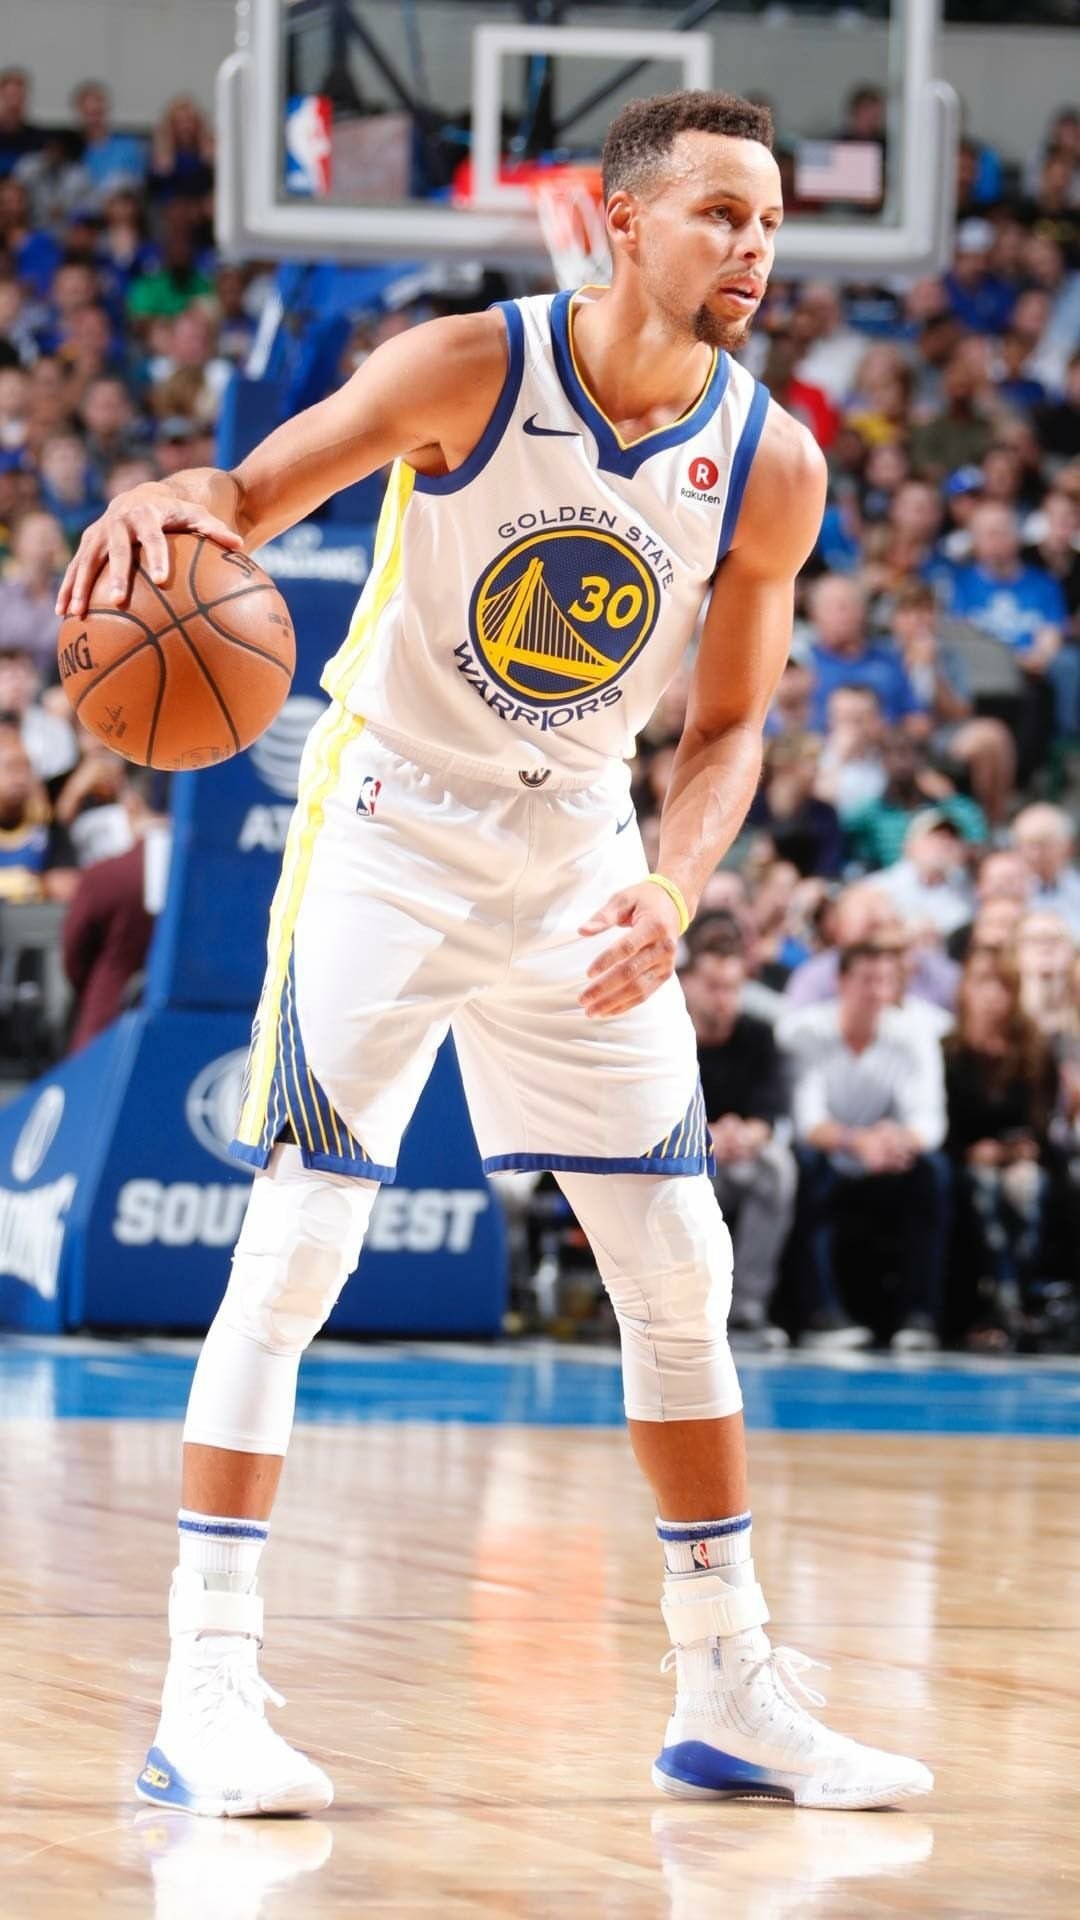 1080x1920 Famous Stephen Curry Wallpaper Iphone Famous Stephen Curry Wallpaper Iphone